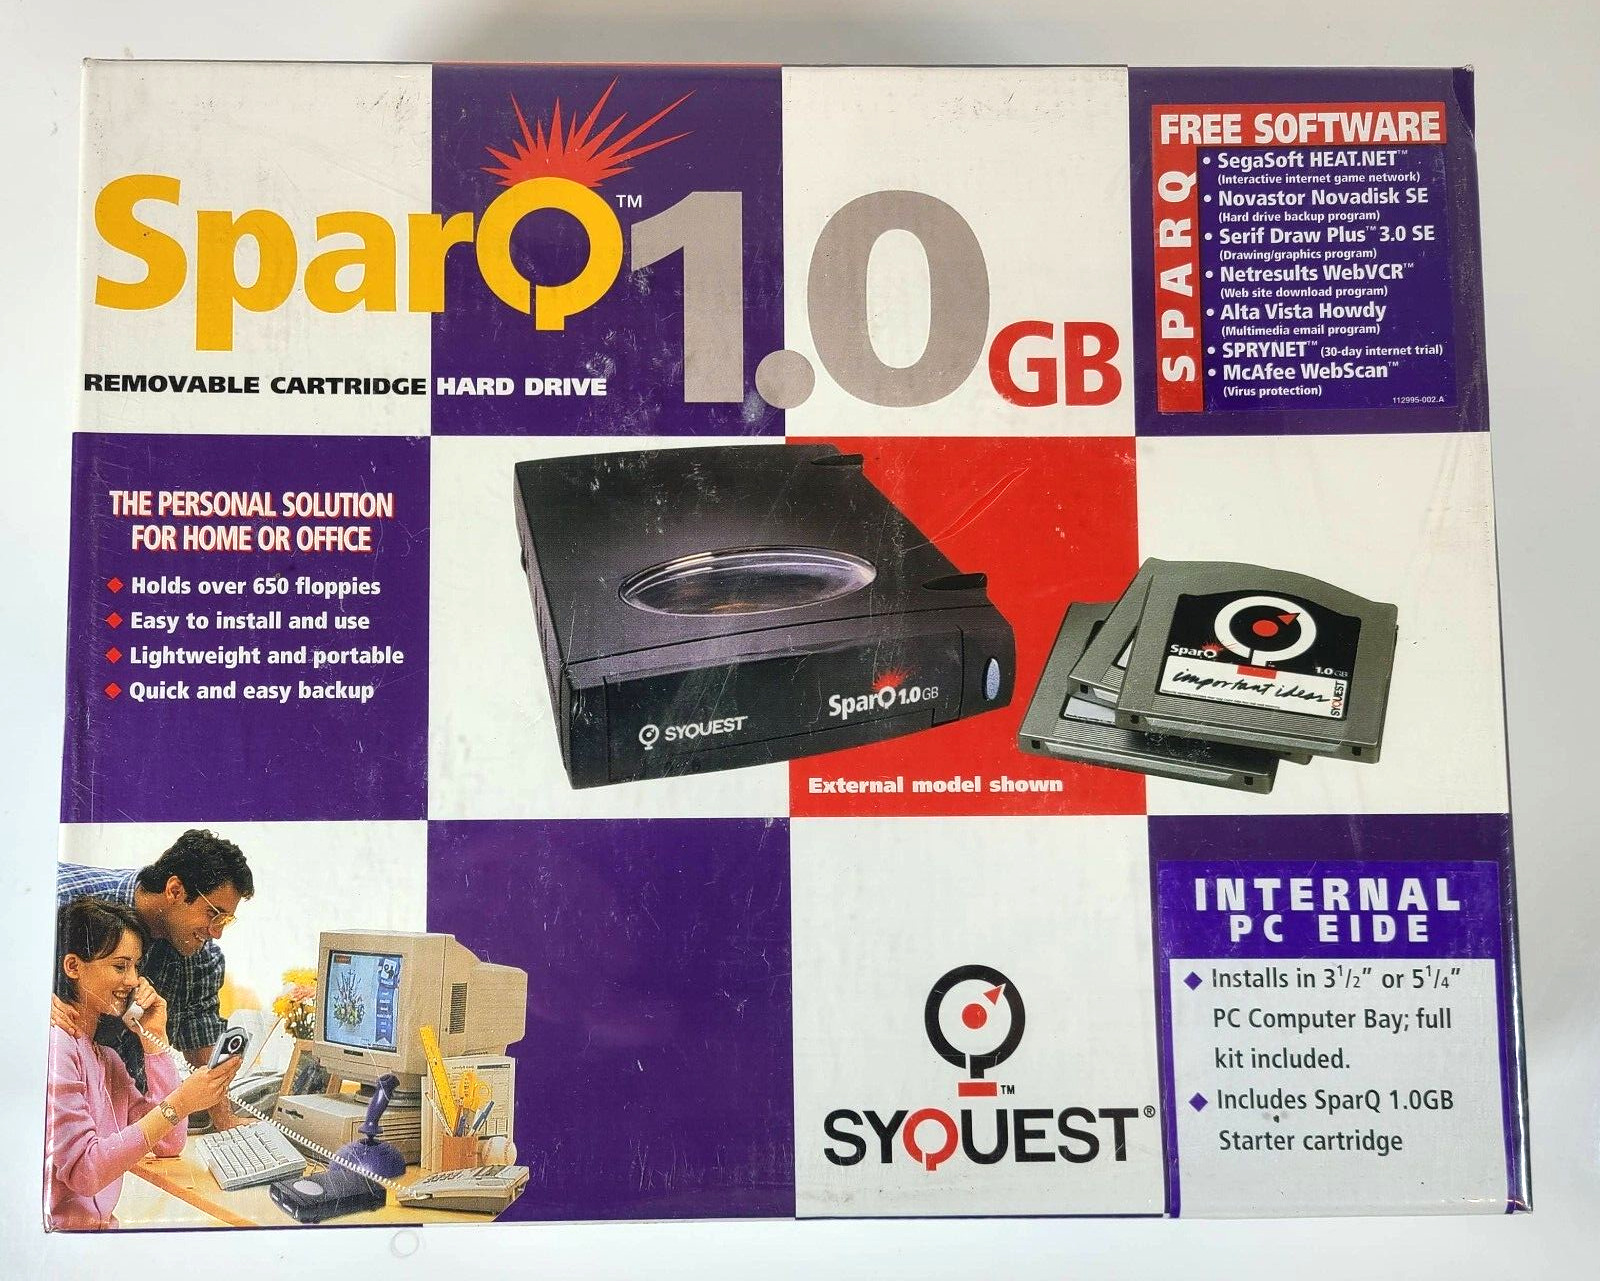 SyQuest SparQ 1.0 GB Internal PC EIDE Removable Cartridge Hard Drive New Sealed